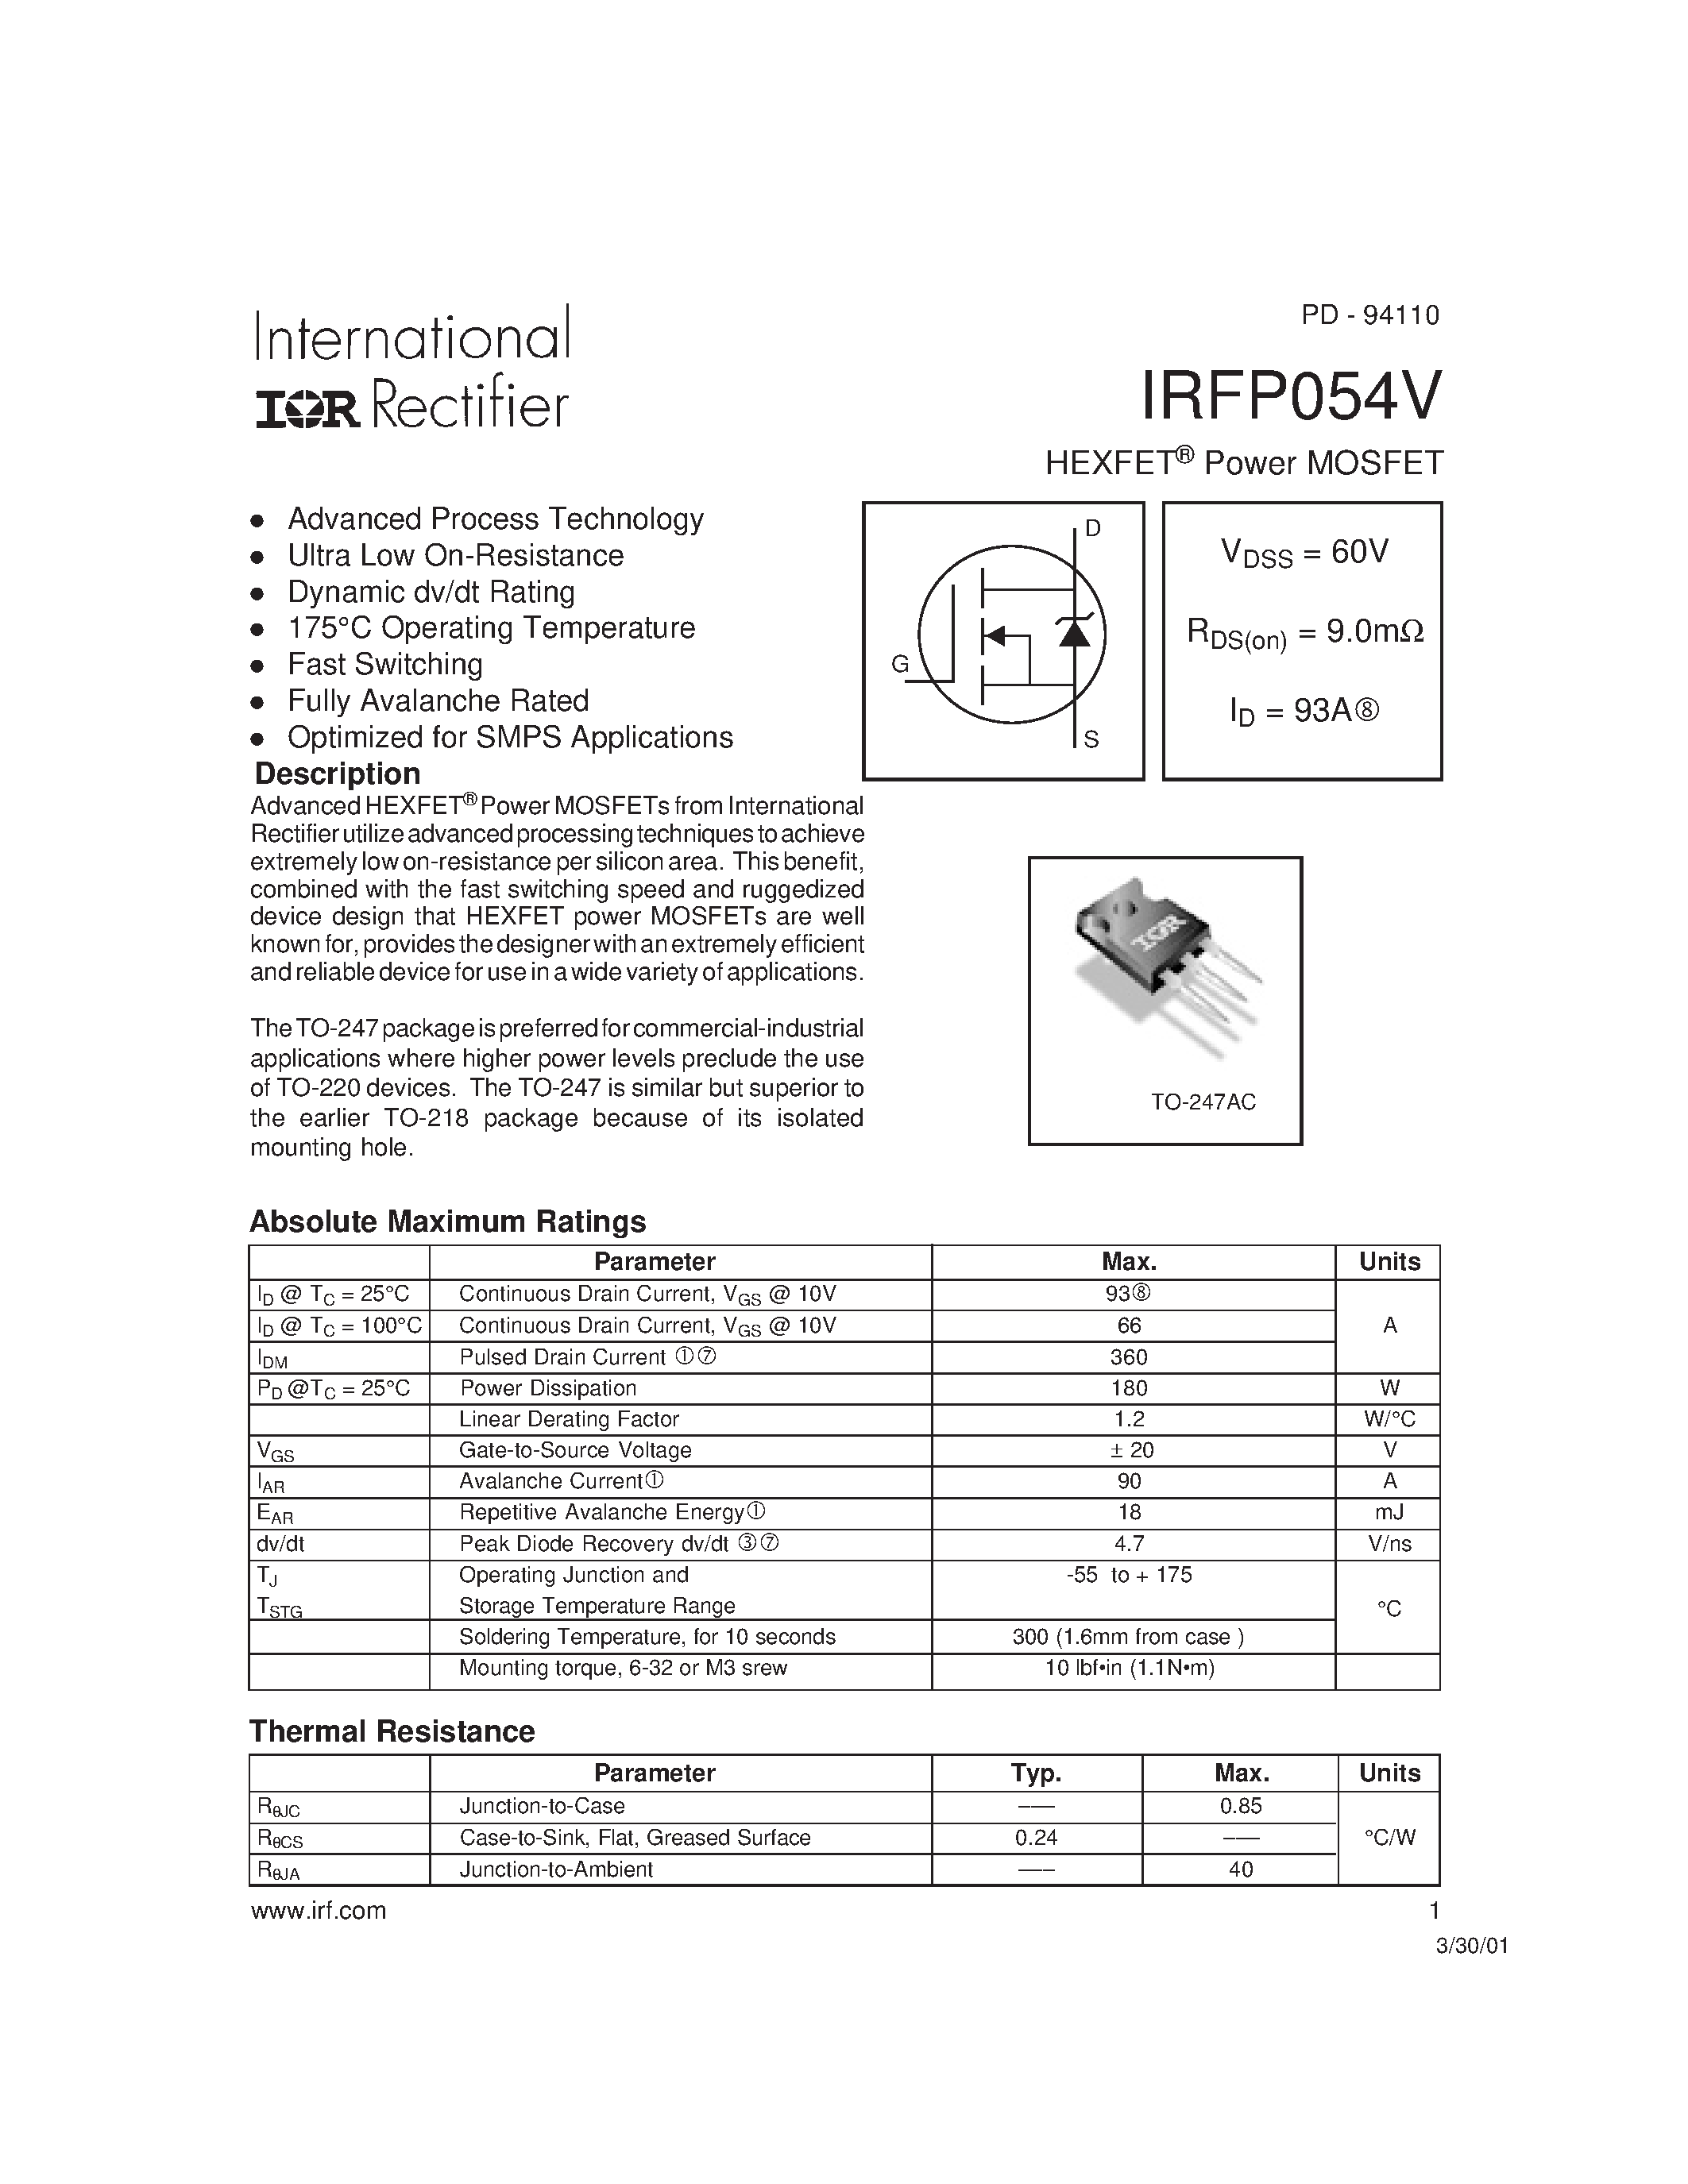 Datasheet IRFP054V - Power MOSFET page 1